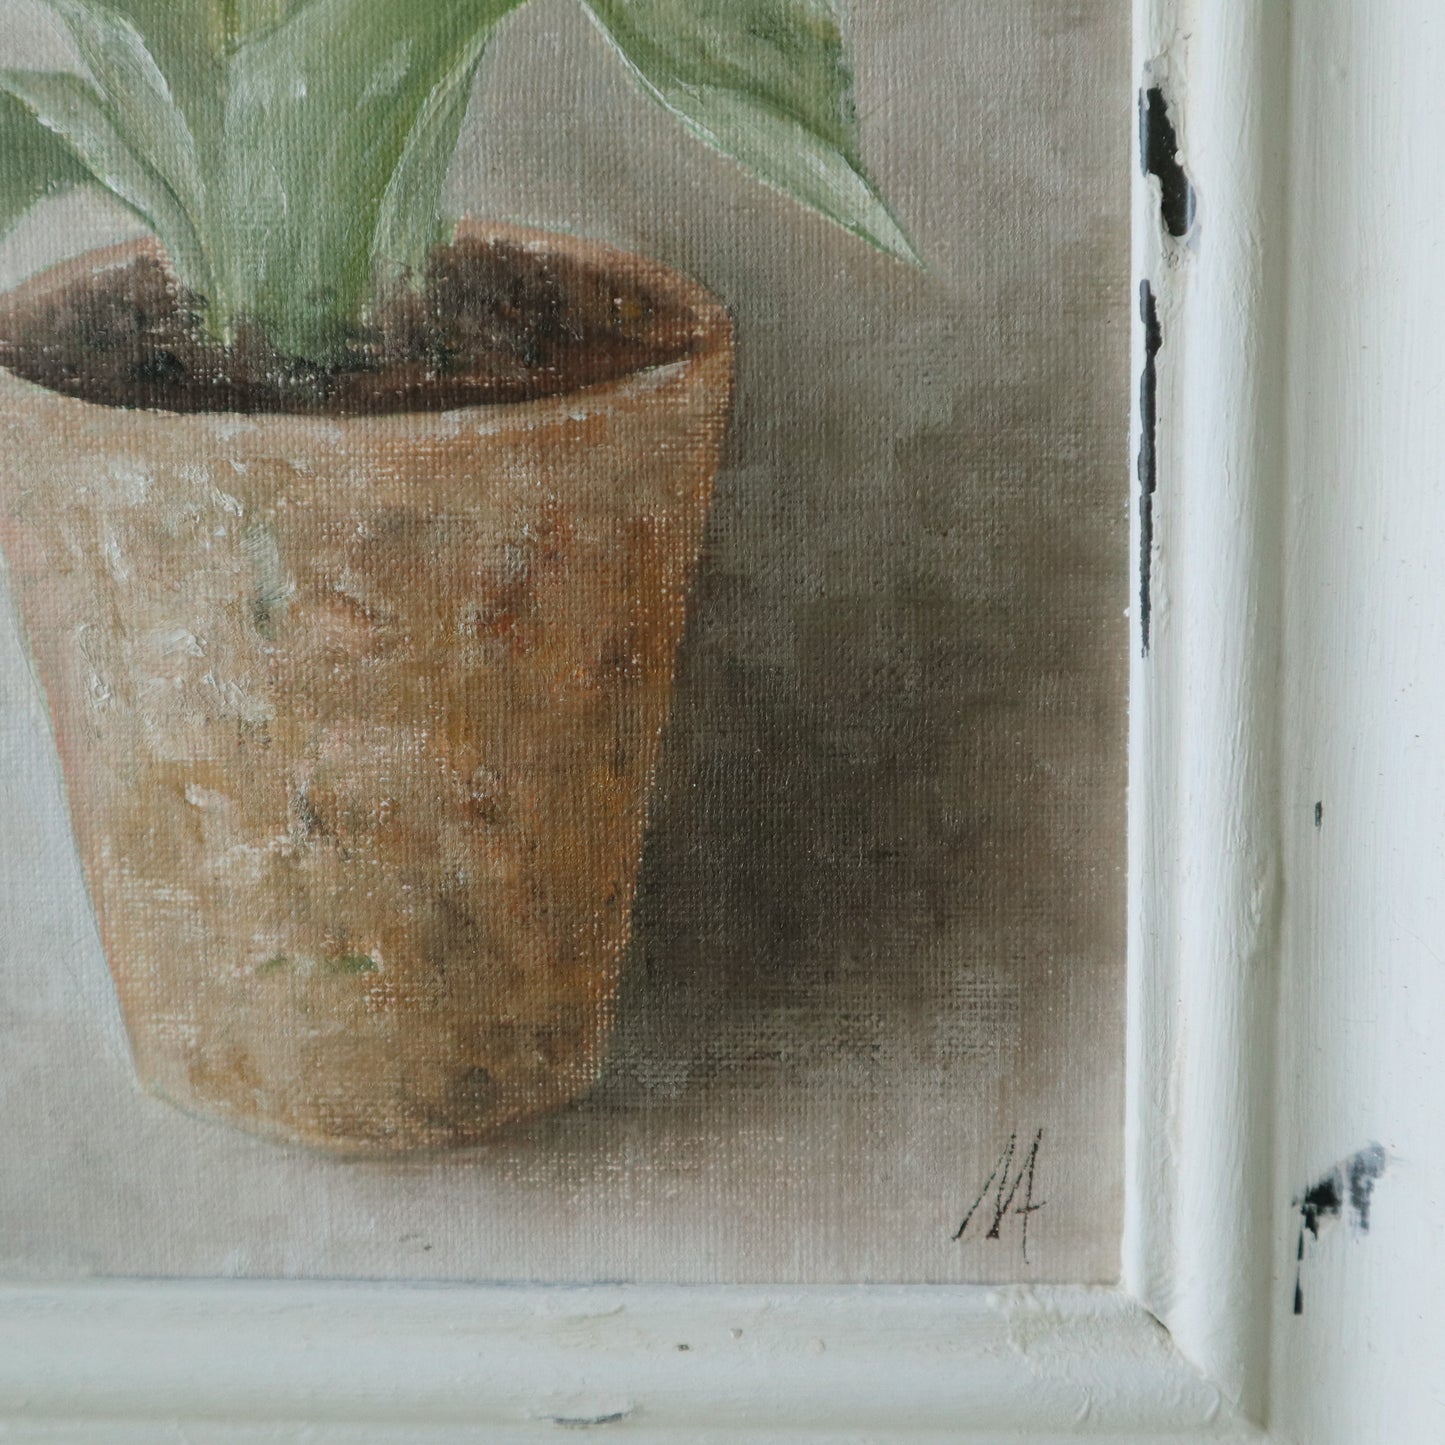 Original Oil Painting From The Potted Floral Collection 'Tulip'